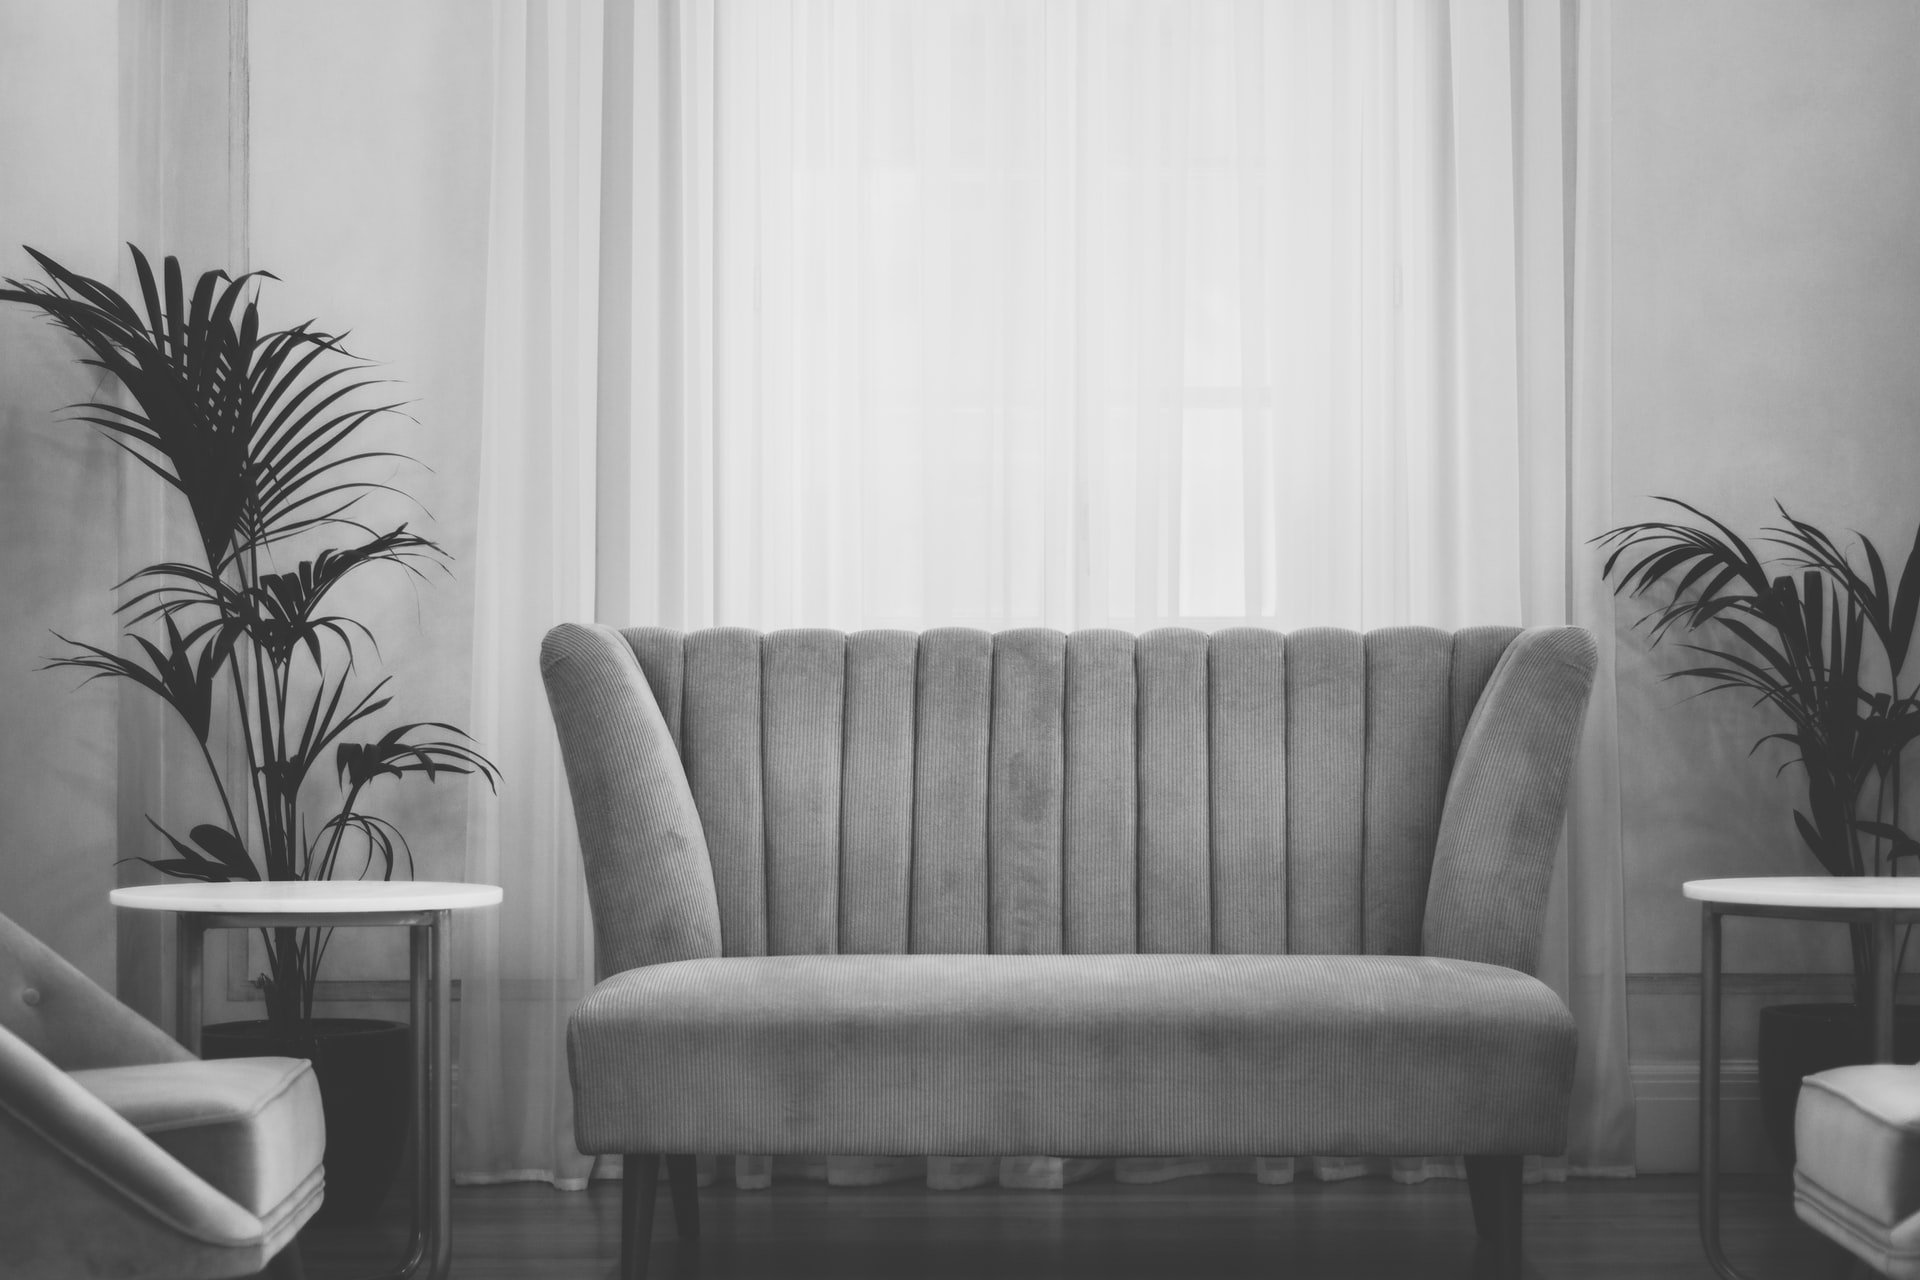 They cheated on the sofa | Source: Unsplash